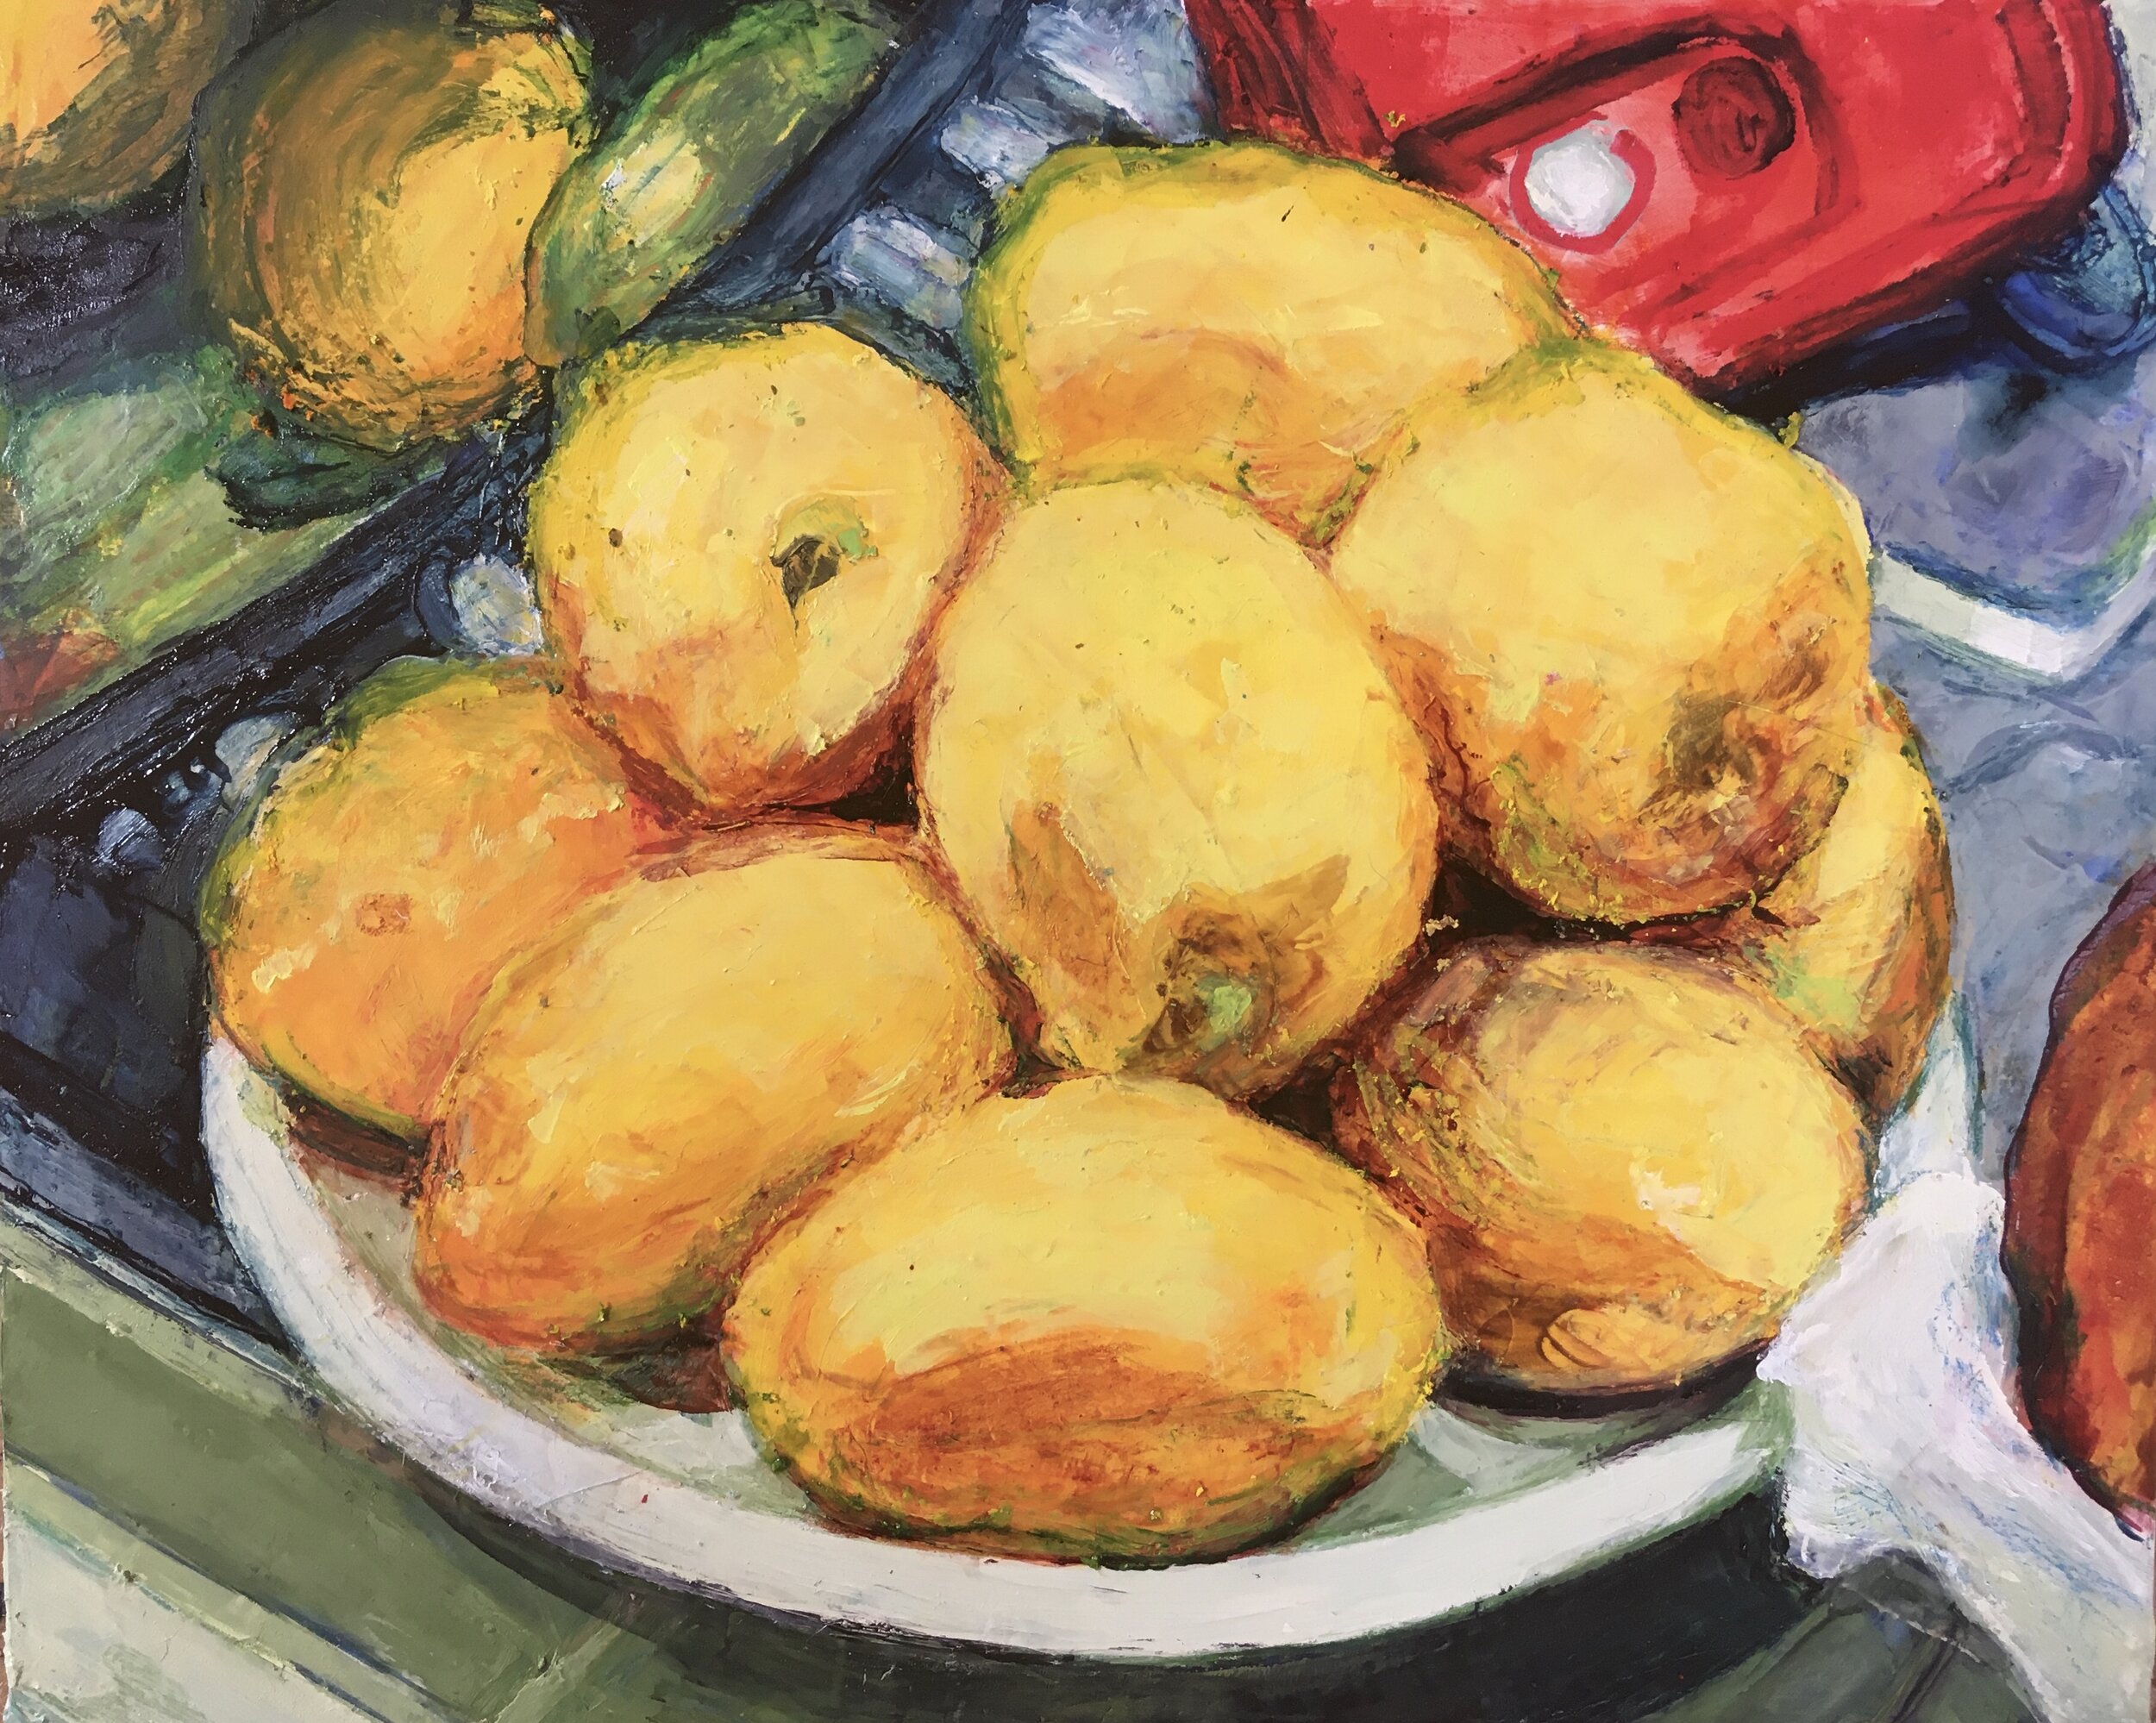 Peeled Mangoes (2020) Oil, Acrylic, Pastel and Colored Pencil on Panel, 10"x8"